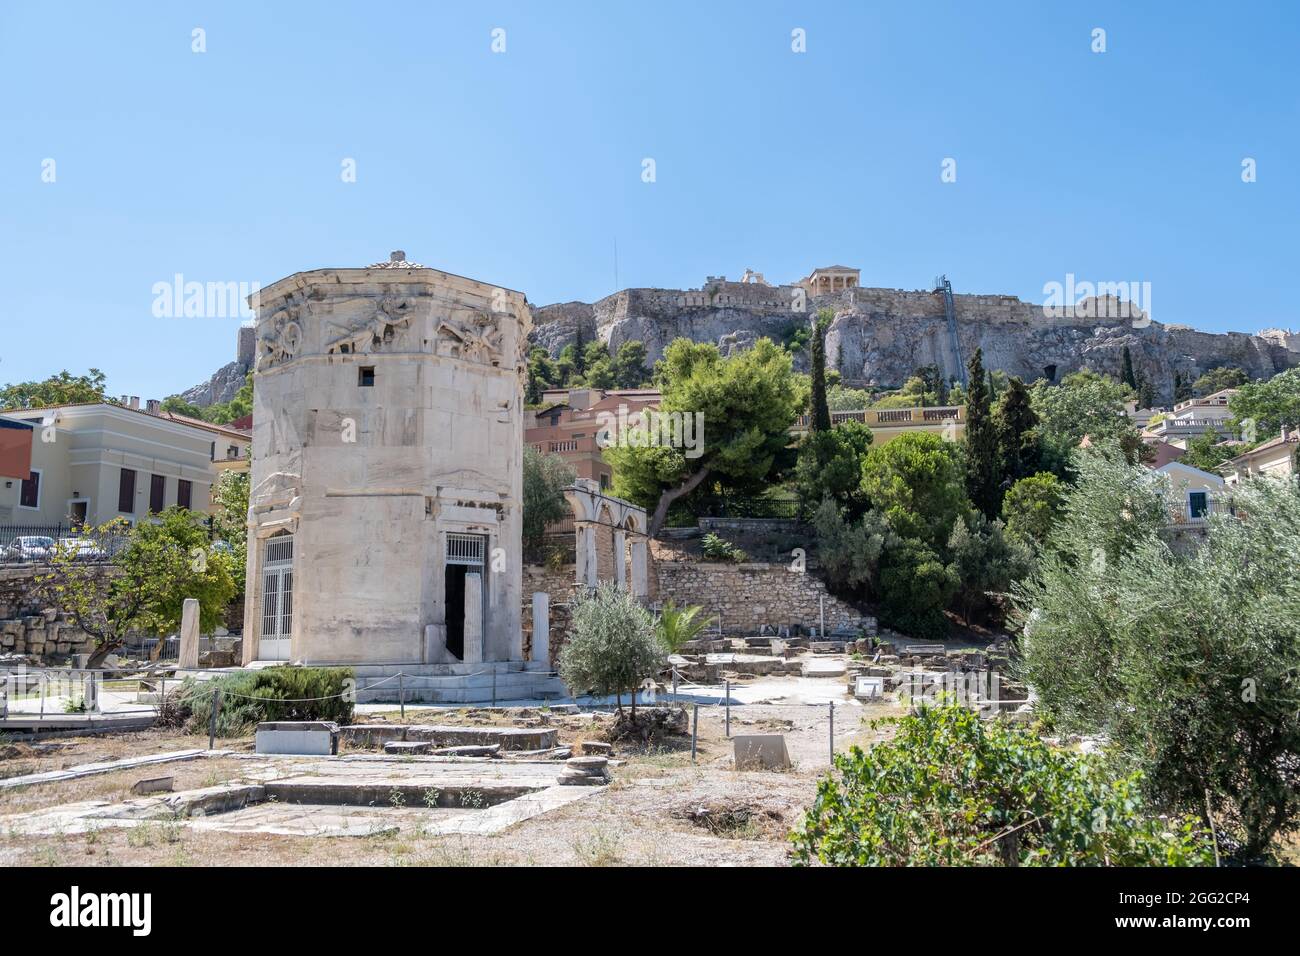 Athens, Greece. Tower of Winds or Aerides on Roman Agora, Famous tourist attraction, Ancient Greek ruins in the city center, Plaka district. Sunny day Stock Photo